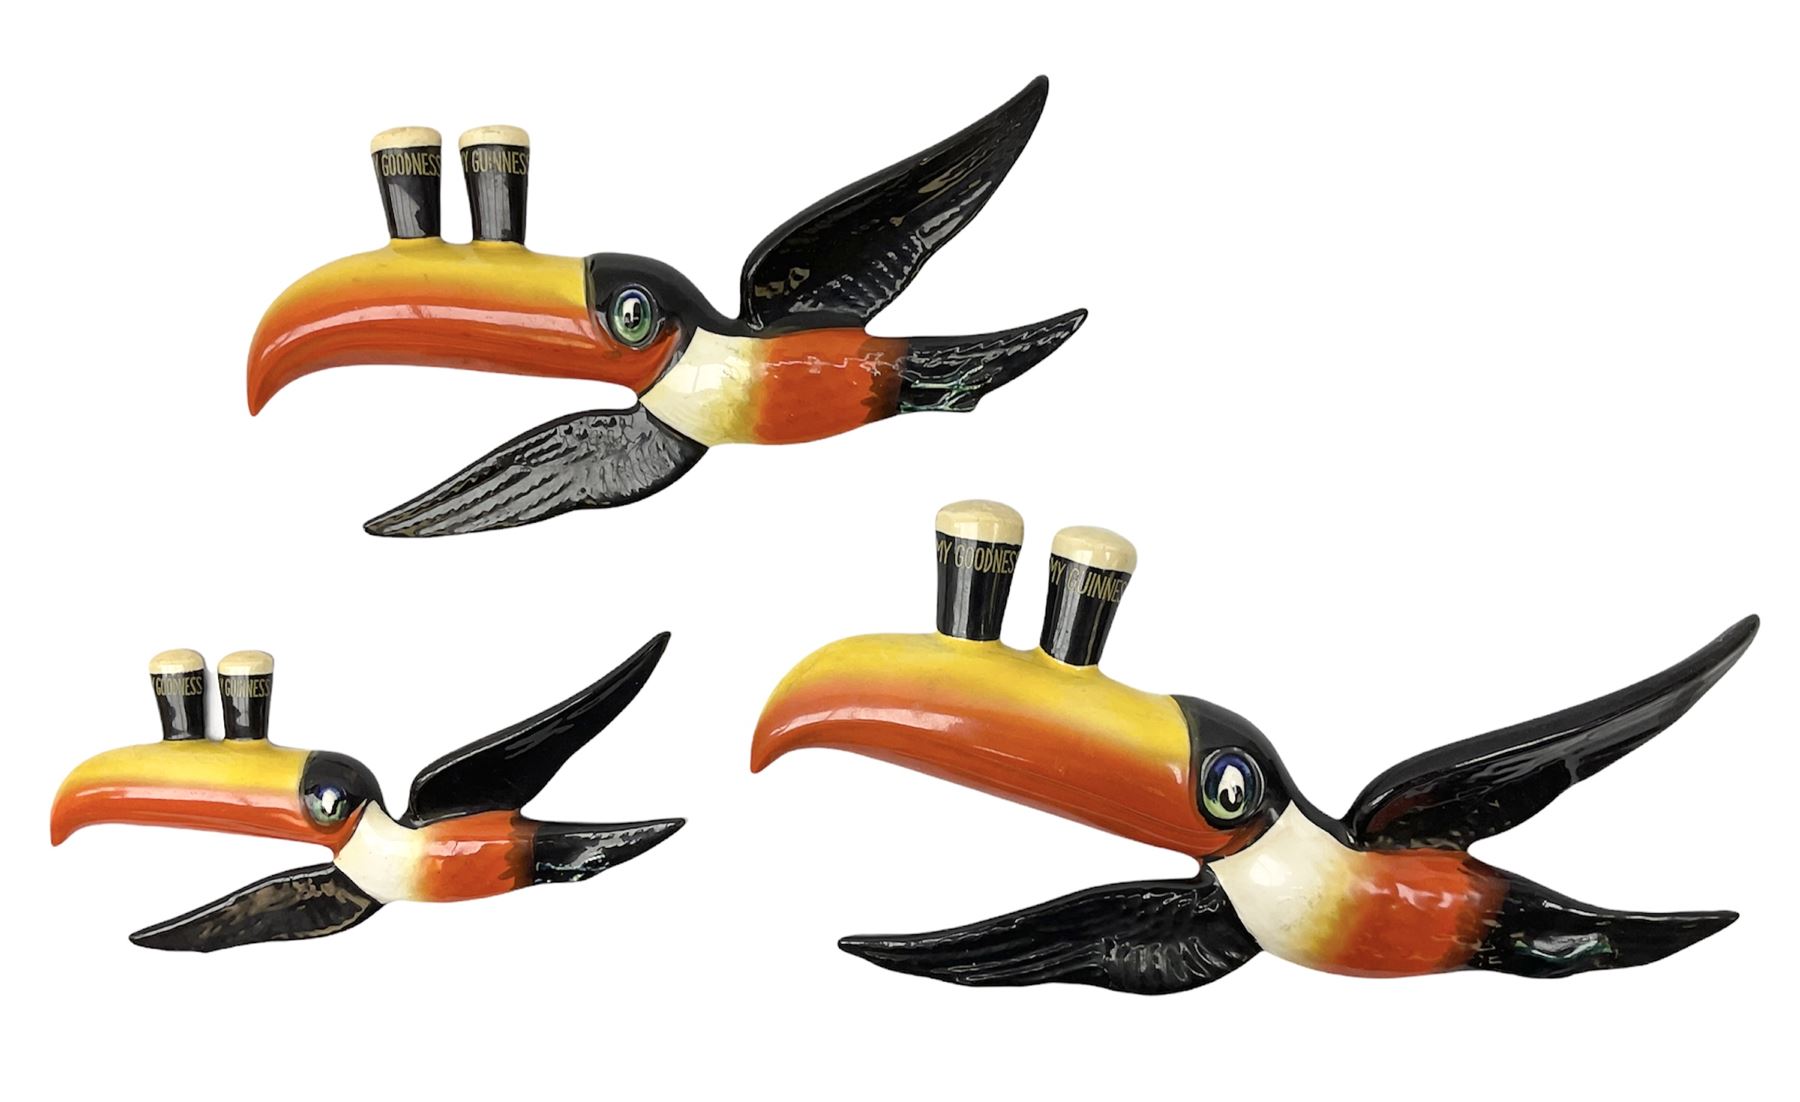 Set of three graduated Carlton Ware ceramic advertising wall plaques modelled as toucans balancing t